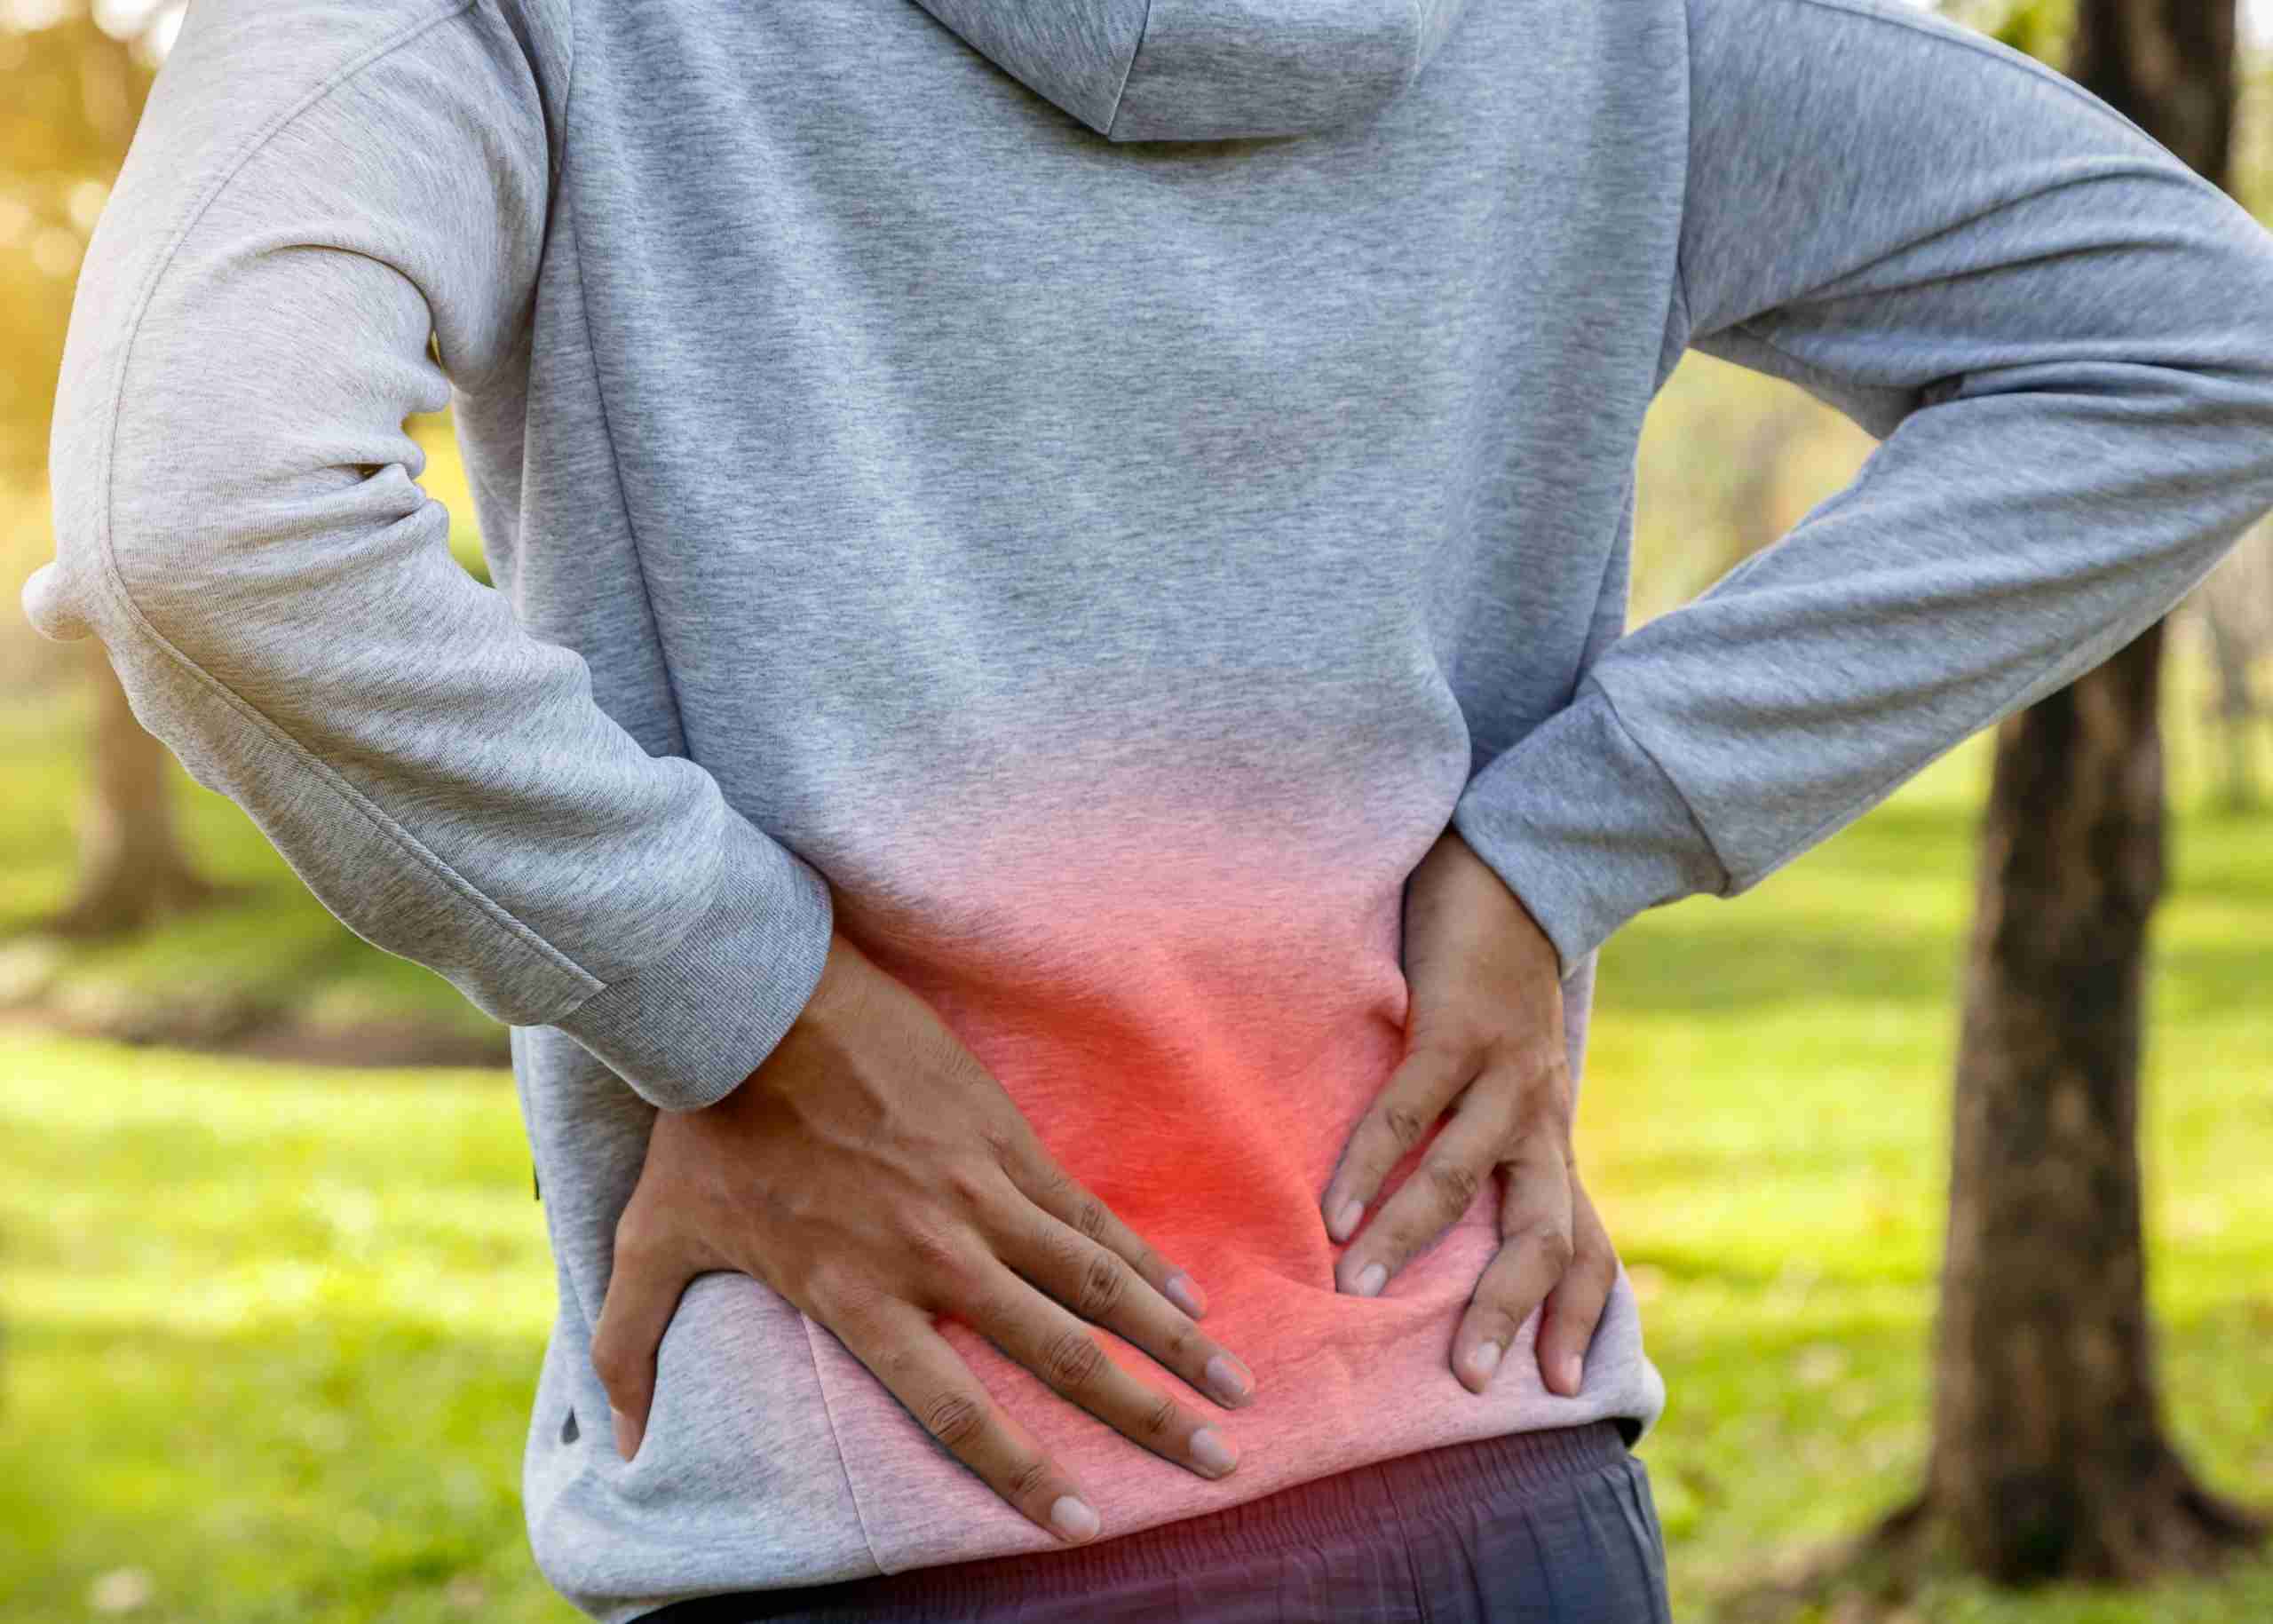 Read on to find the causes, symptoms and treatment of back pain!